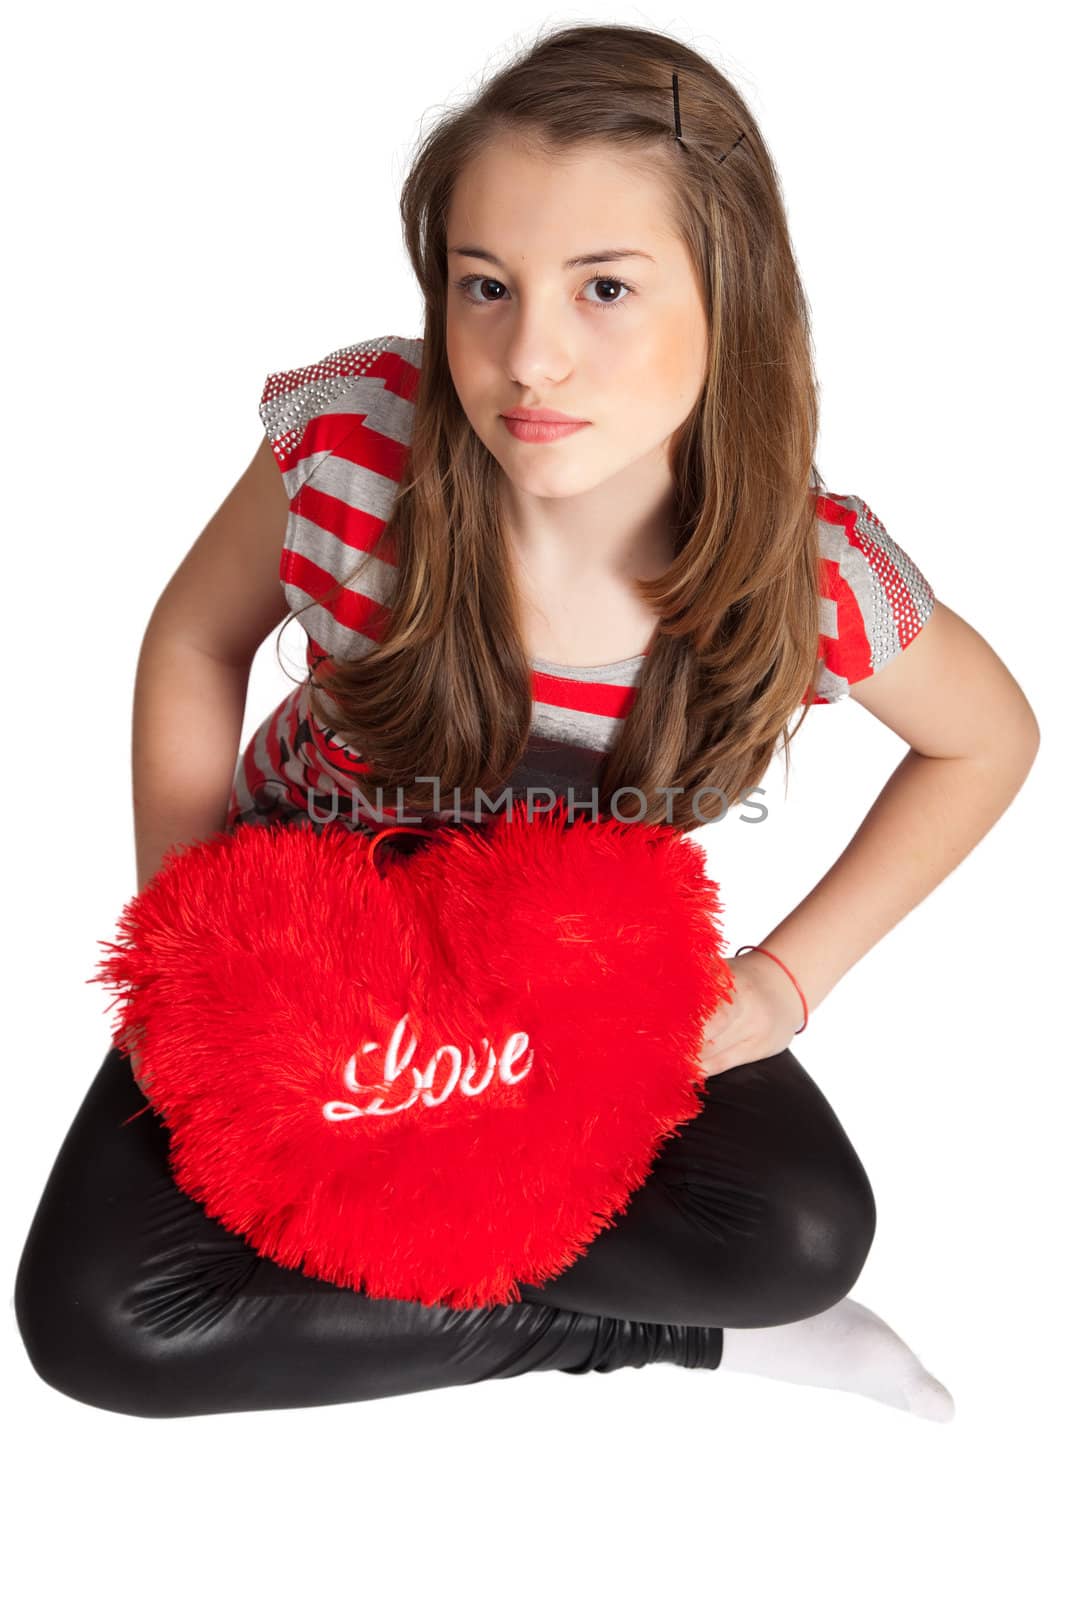 Girl Sitting With Heart Shaped Pillow by cherrinka